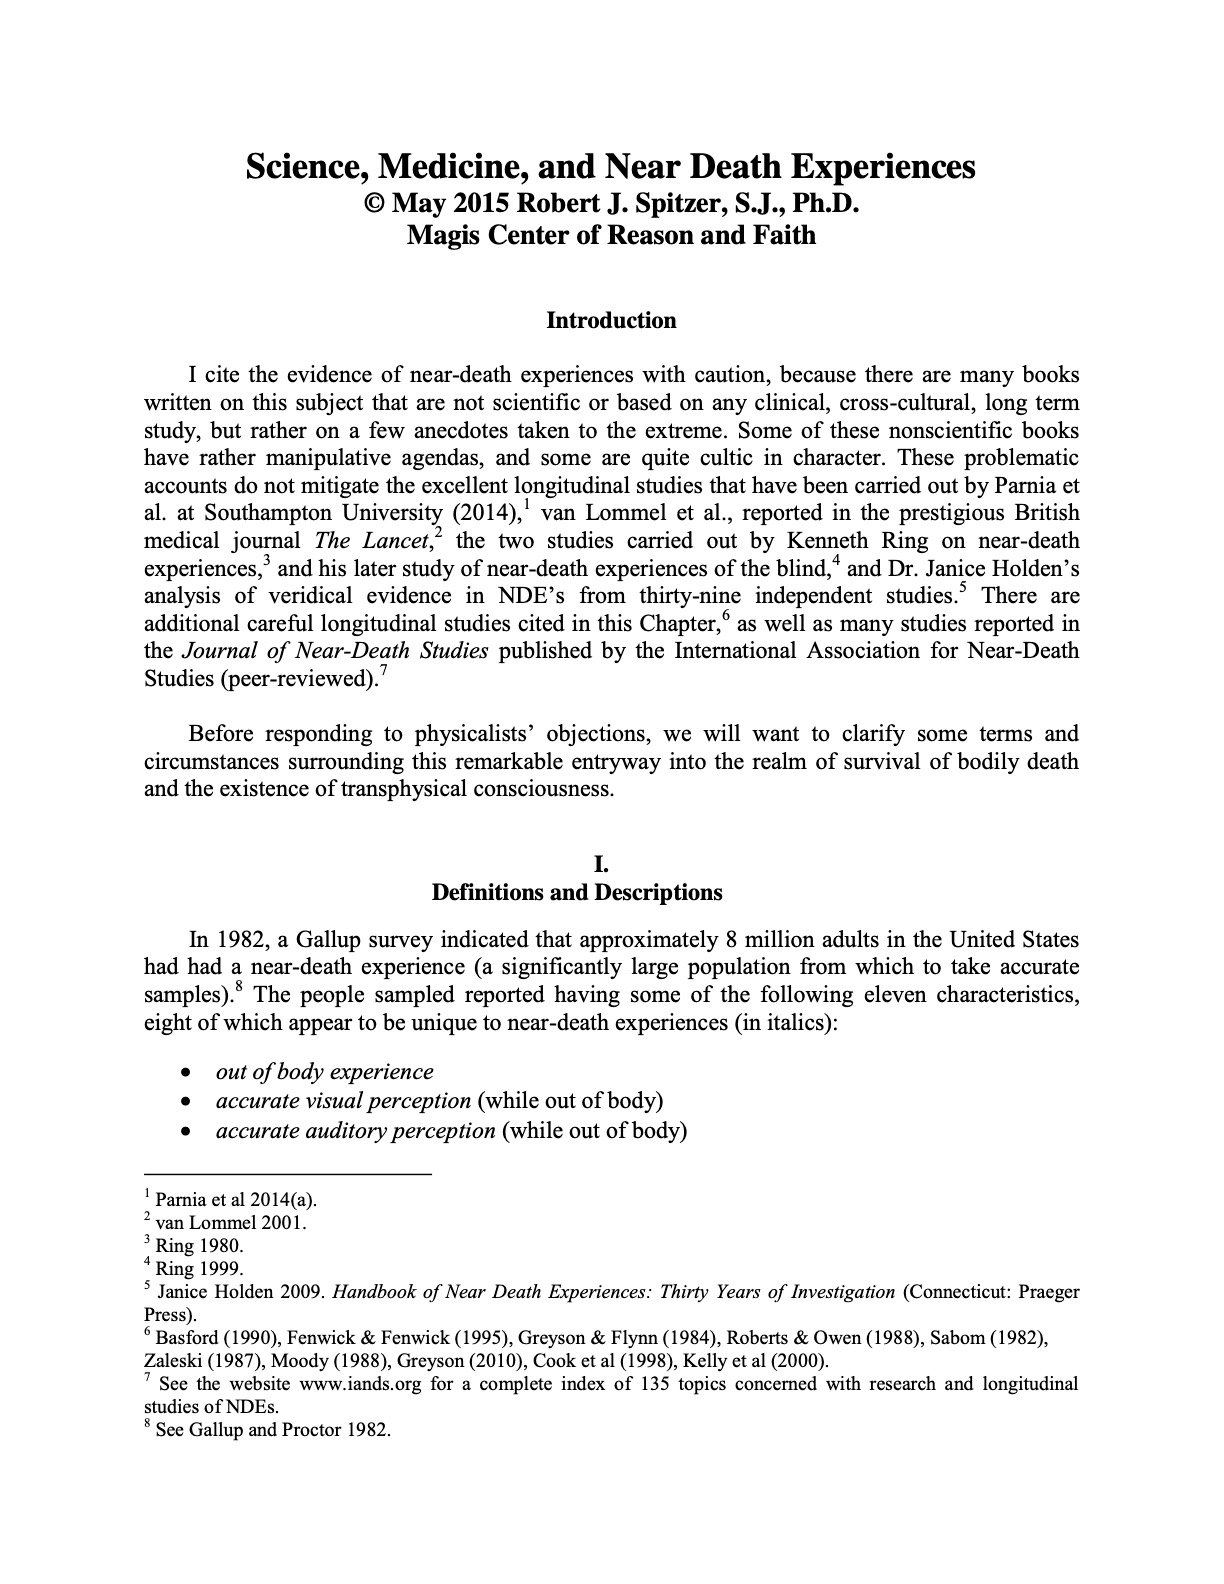 Science_Medicine_and_NDEs_First Page